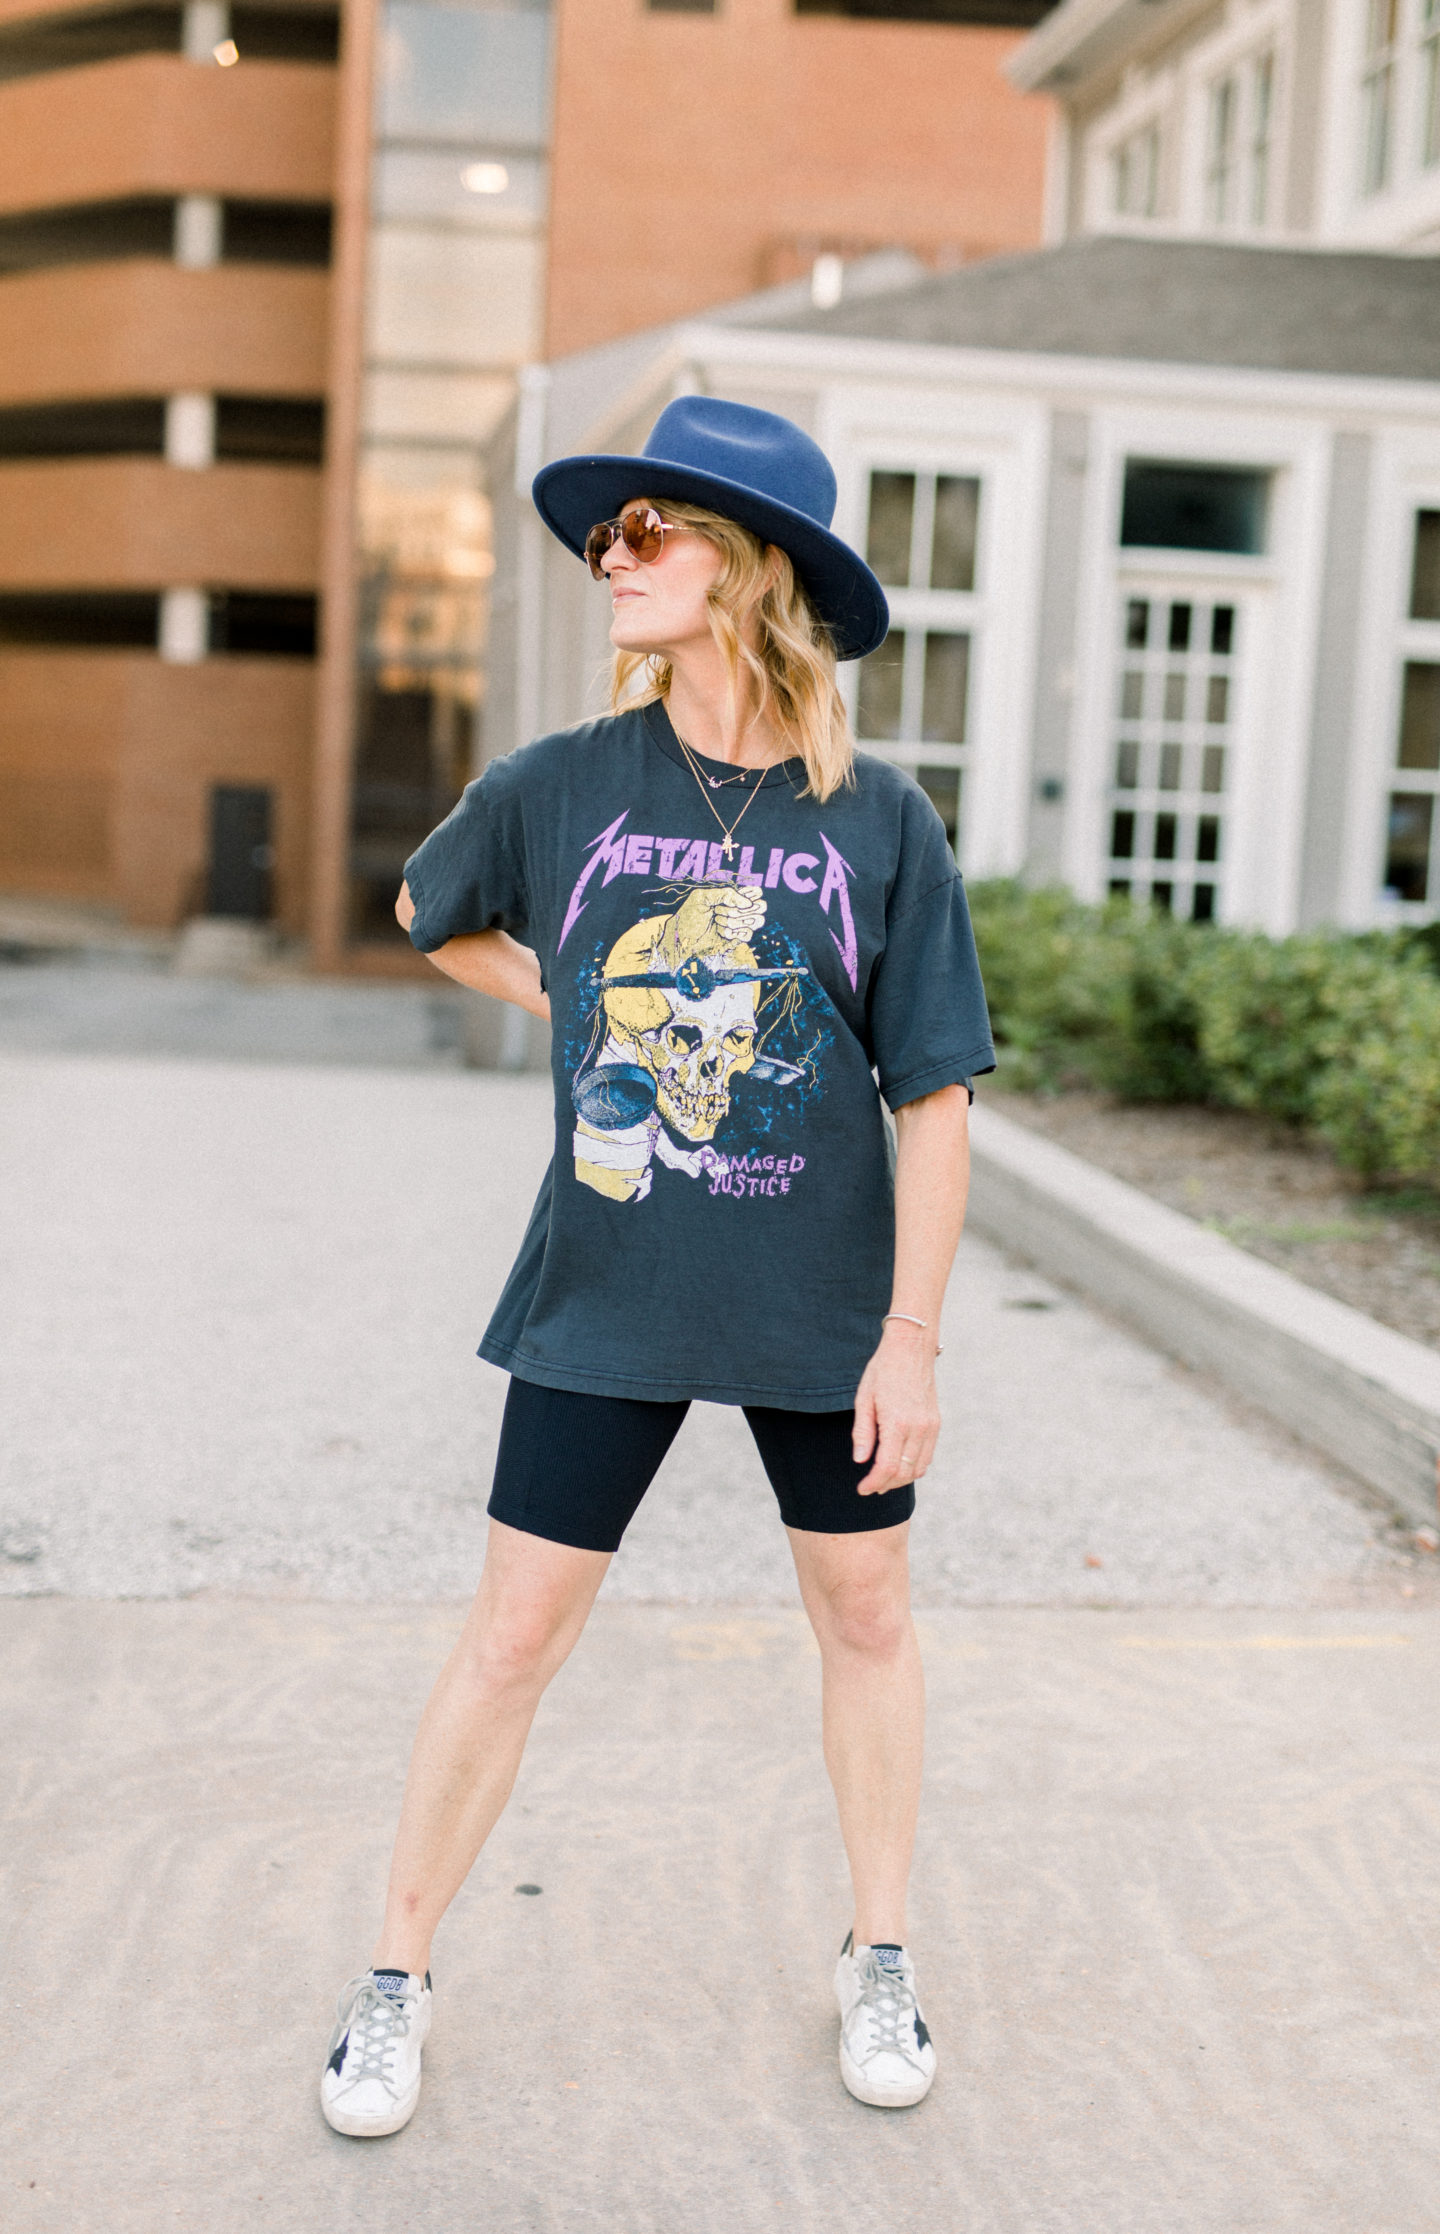 2019 Nordstrom Anniversary Sale: What We Purchased | nordstrom anniversary sale 2019 | nordstrom anniversary sale | band tee outfits | band tee outfits summer | bike shorts outfit | bike shorts outfit summer | bike shorts outfit casual | biker shorts outfit | biker shorts outfit summer | biker shorts outfit casual | Oh Darling Blog